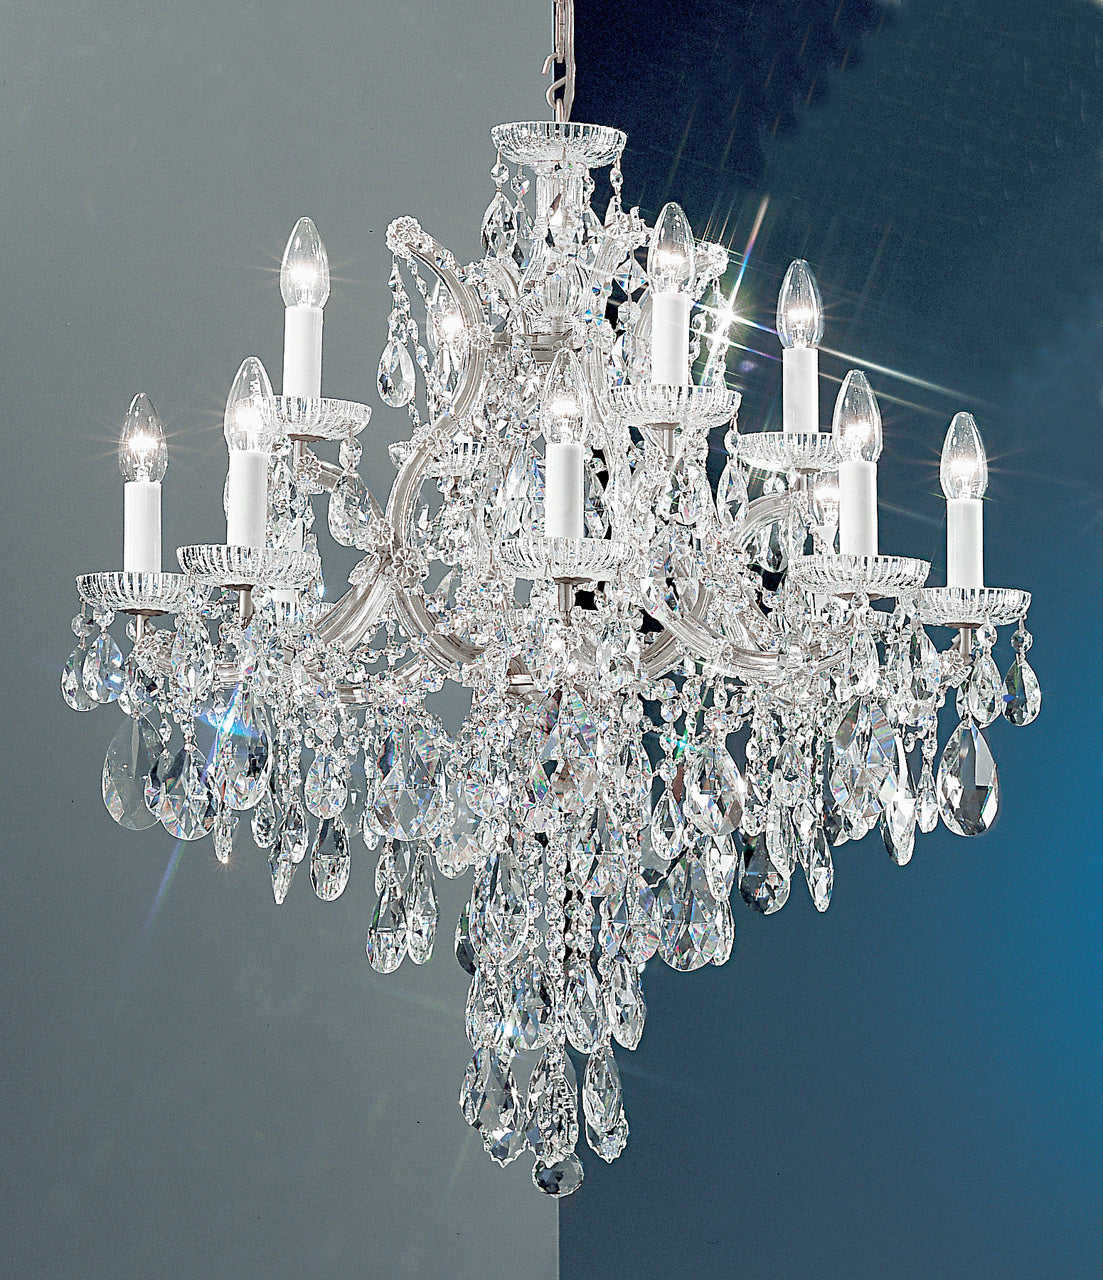 Classic Lighting 8123 CH S Maria Theresa Traditional Crystal Chandelier in Chrome (Imported from Italy)